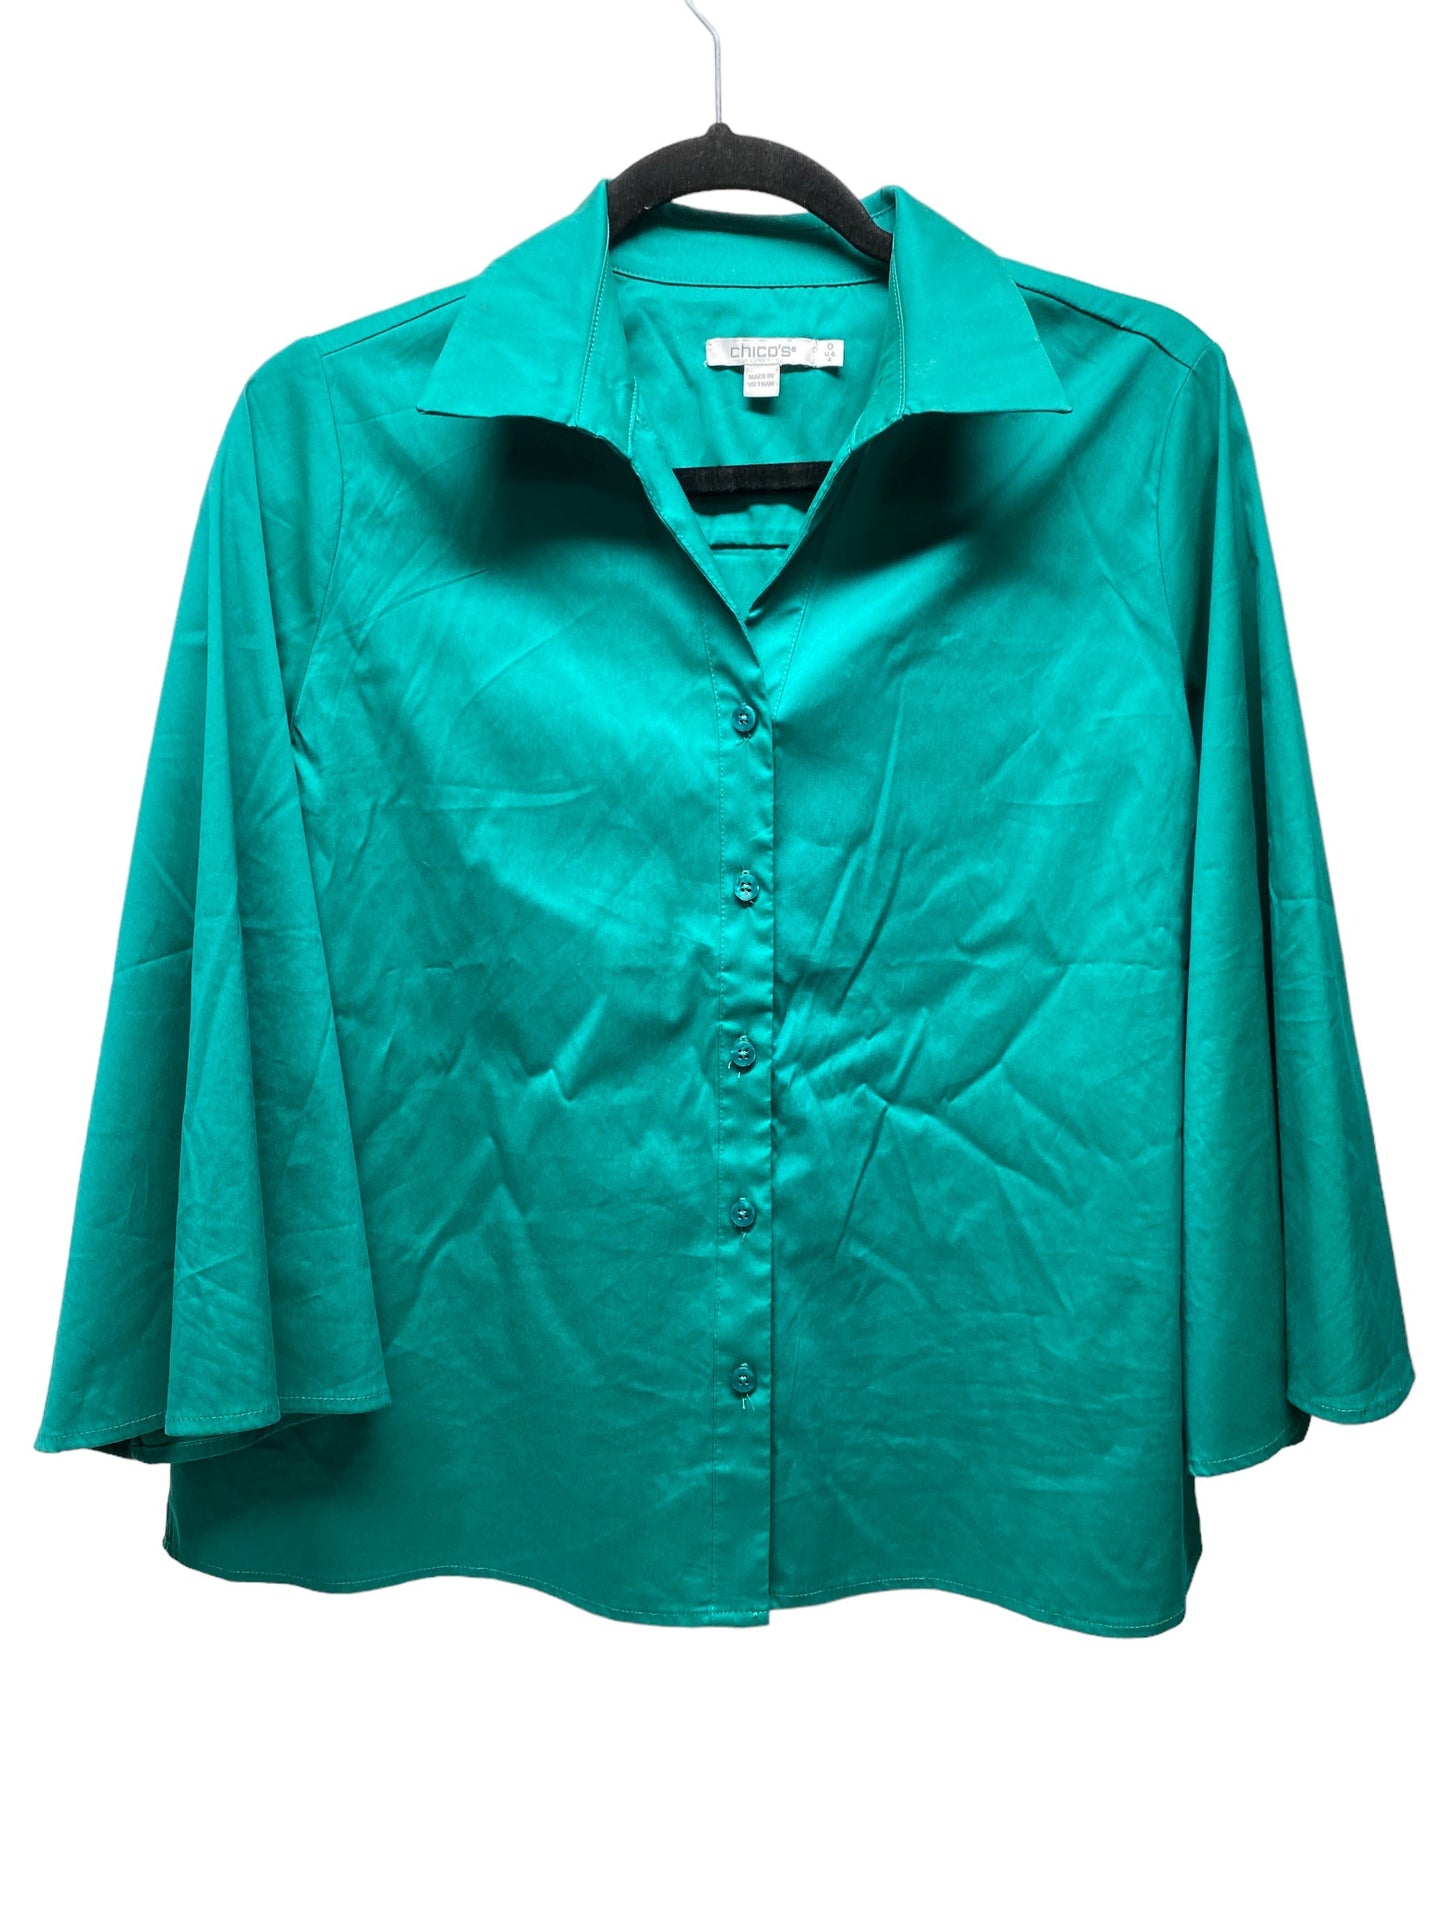 Green Top 3/4 Sleeve Chicos, Size 4